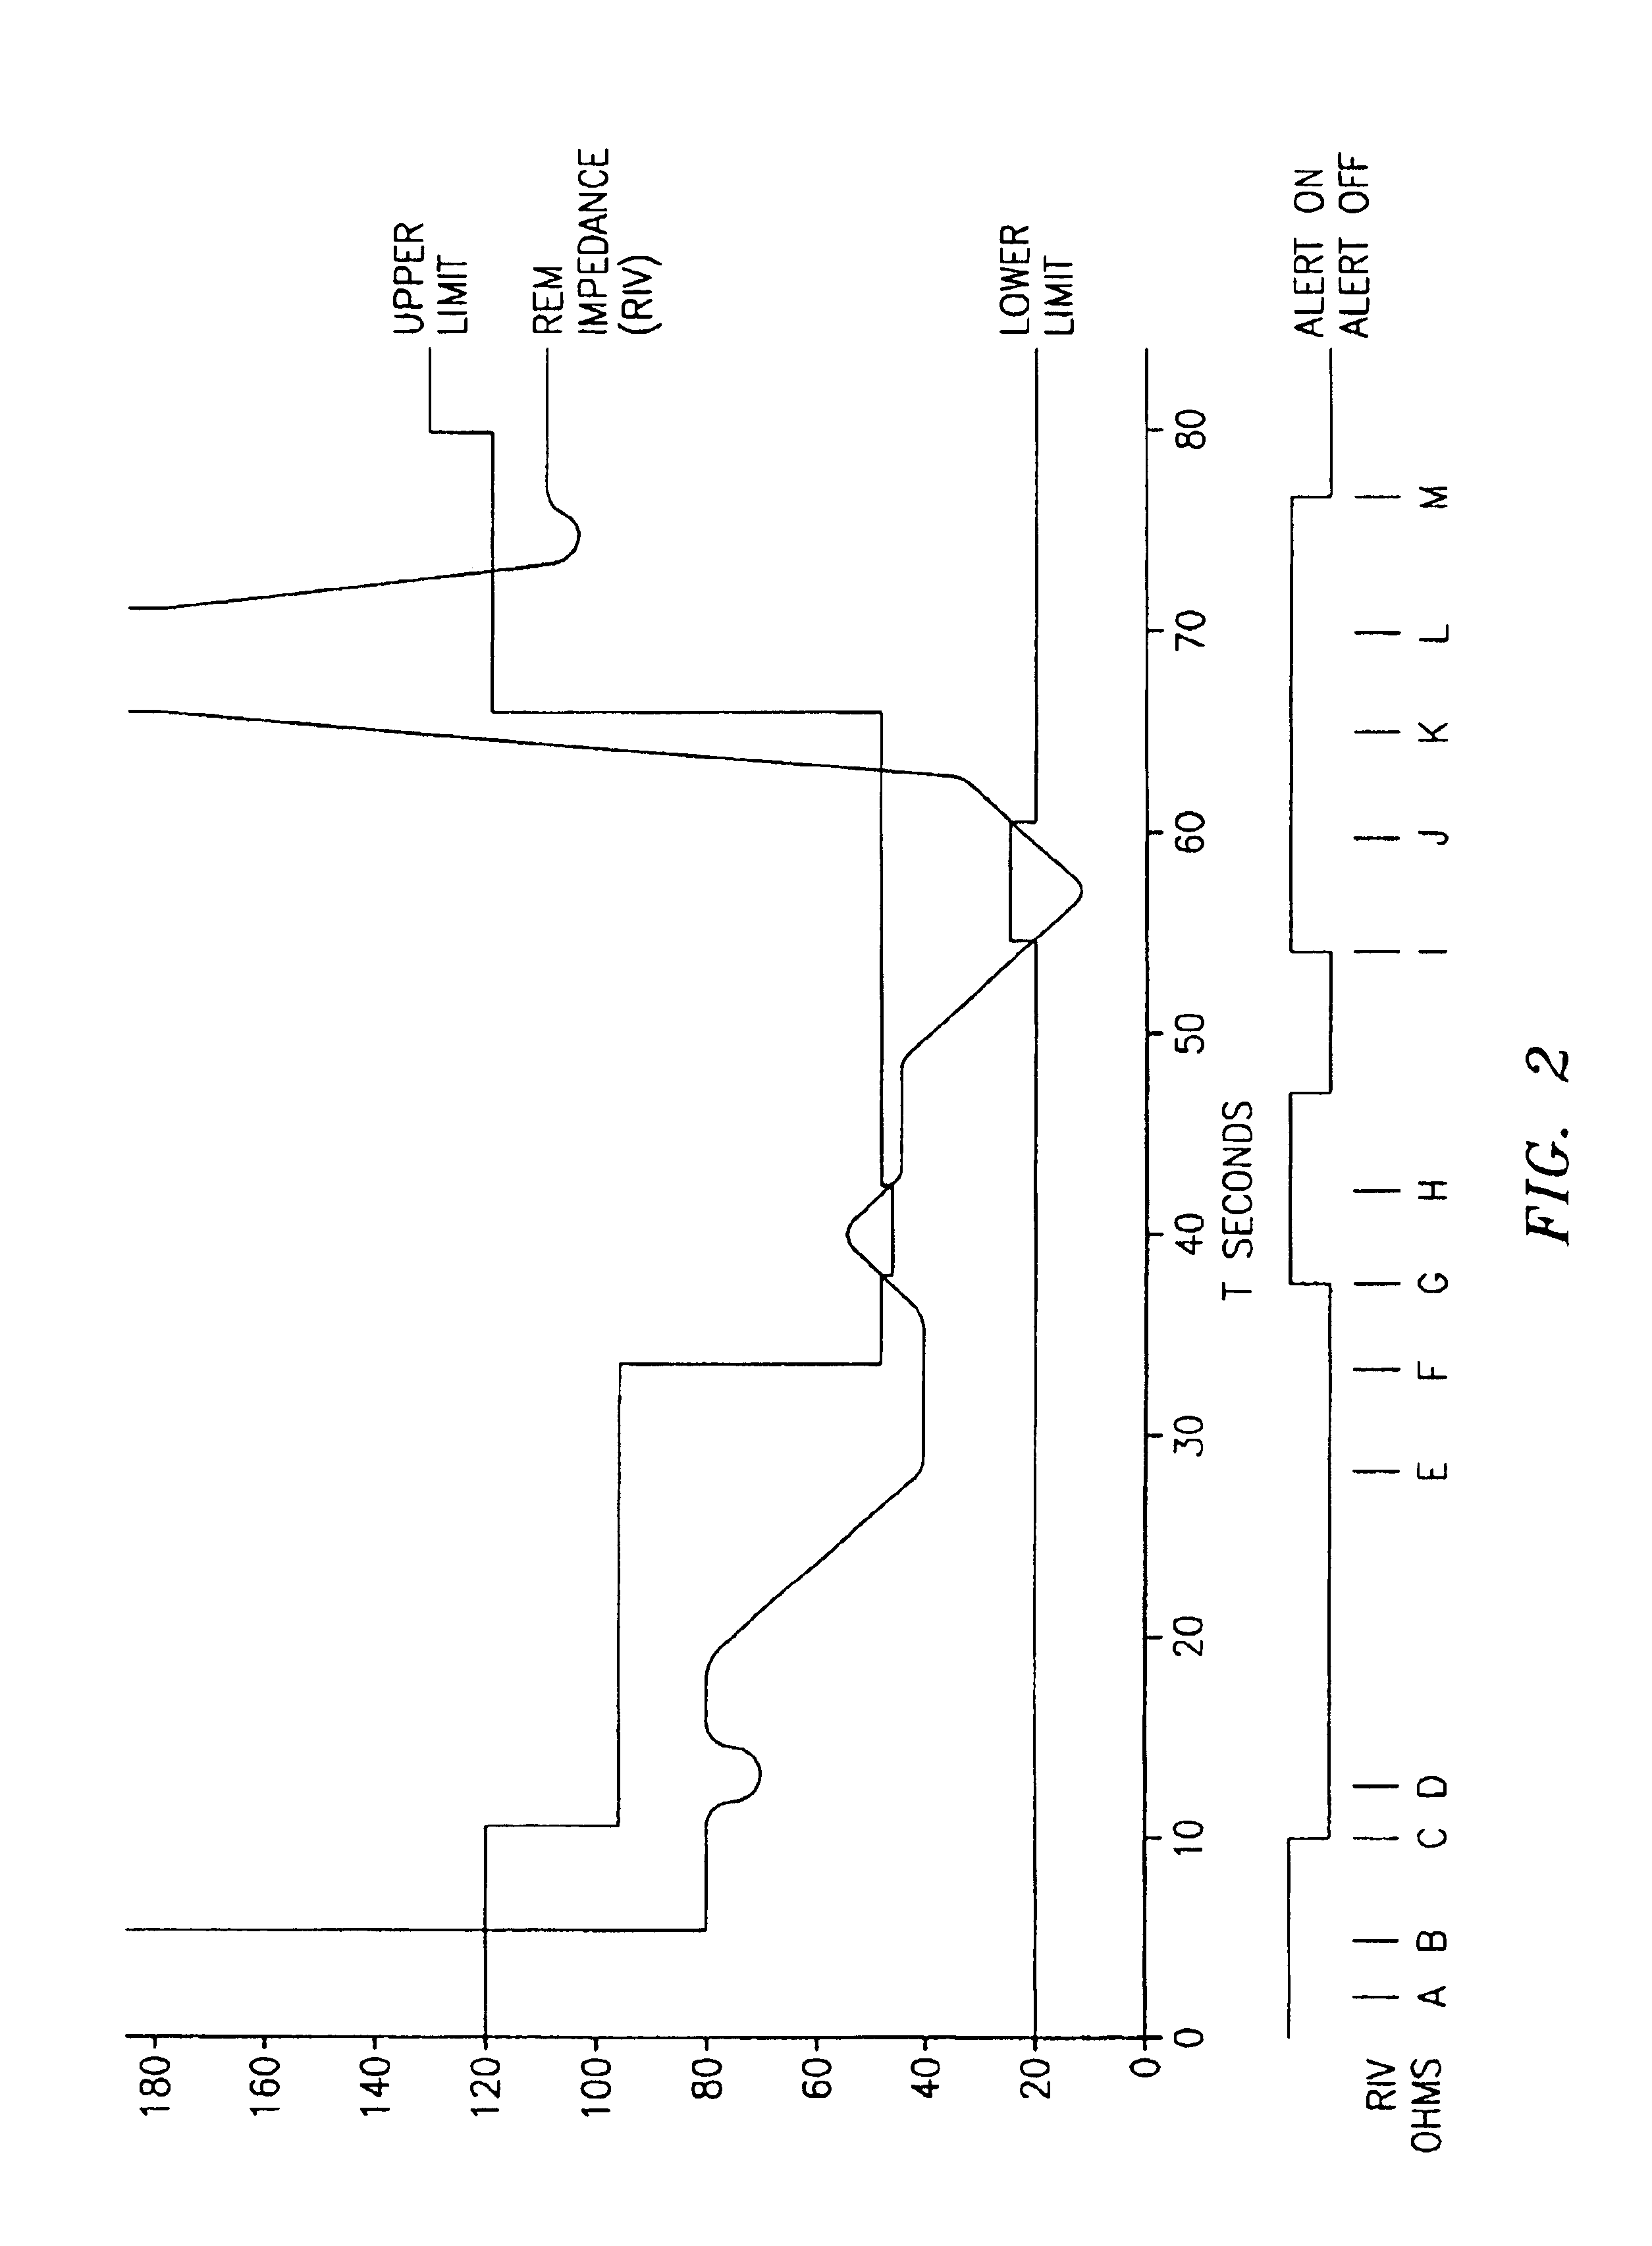 Multiple RF return pad contact detection system